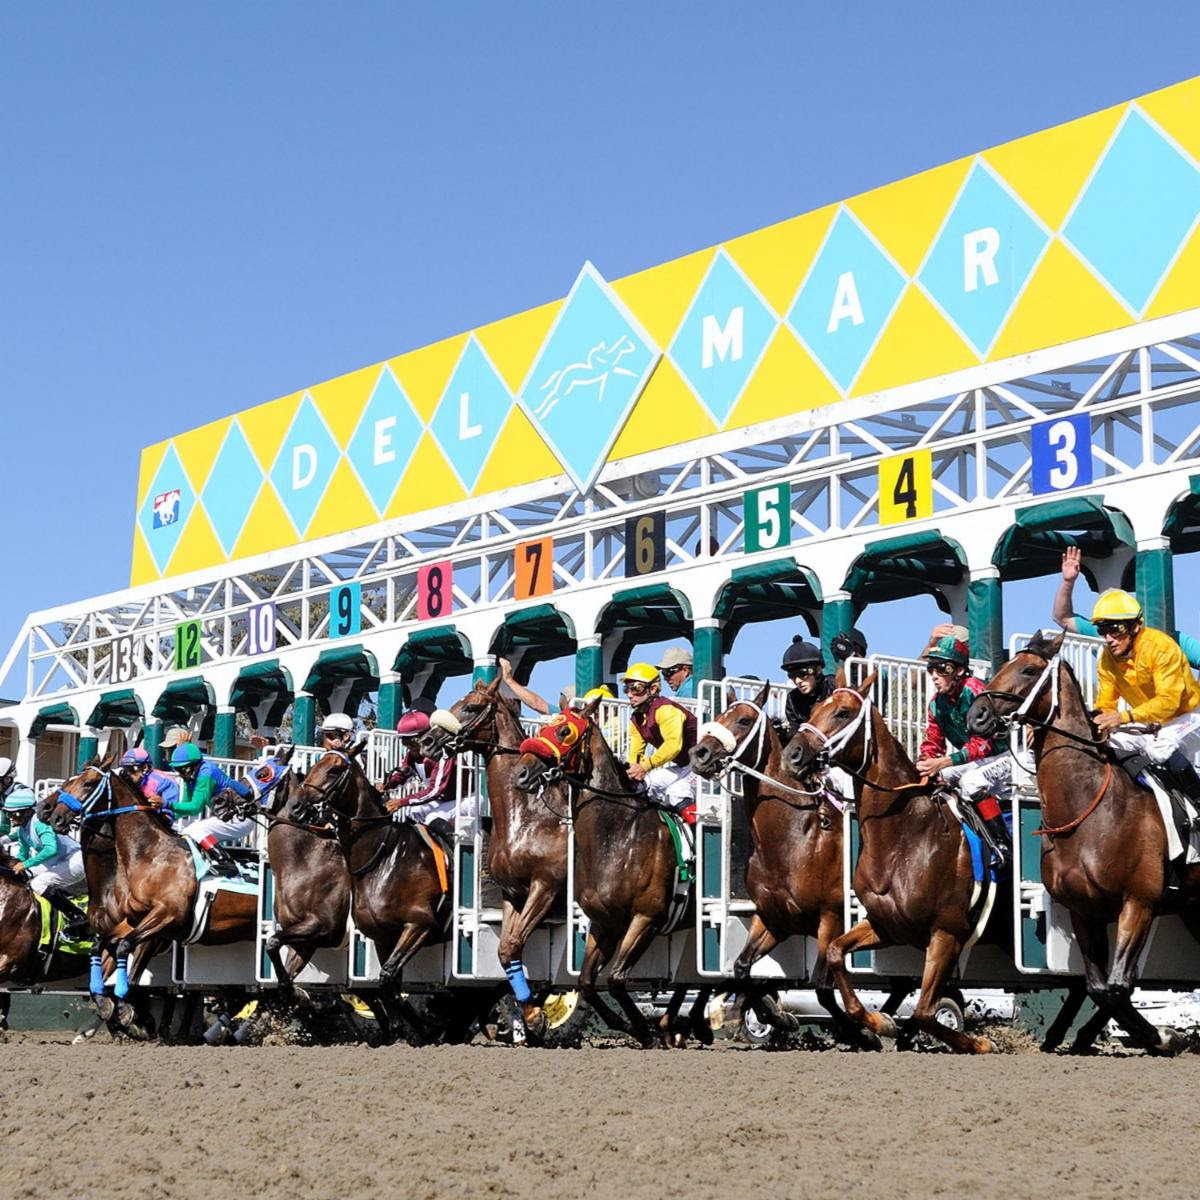 Del Mar Race Track Opening Gate - Horses ready to go